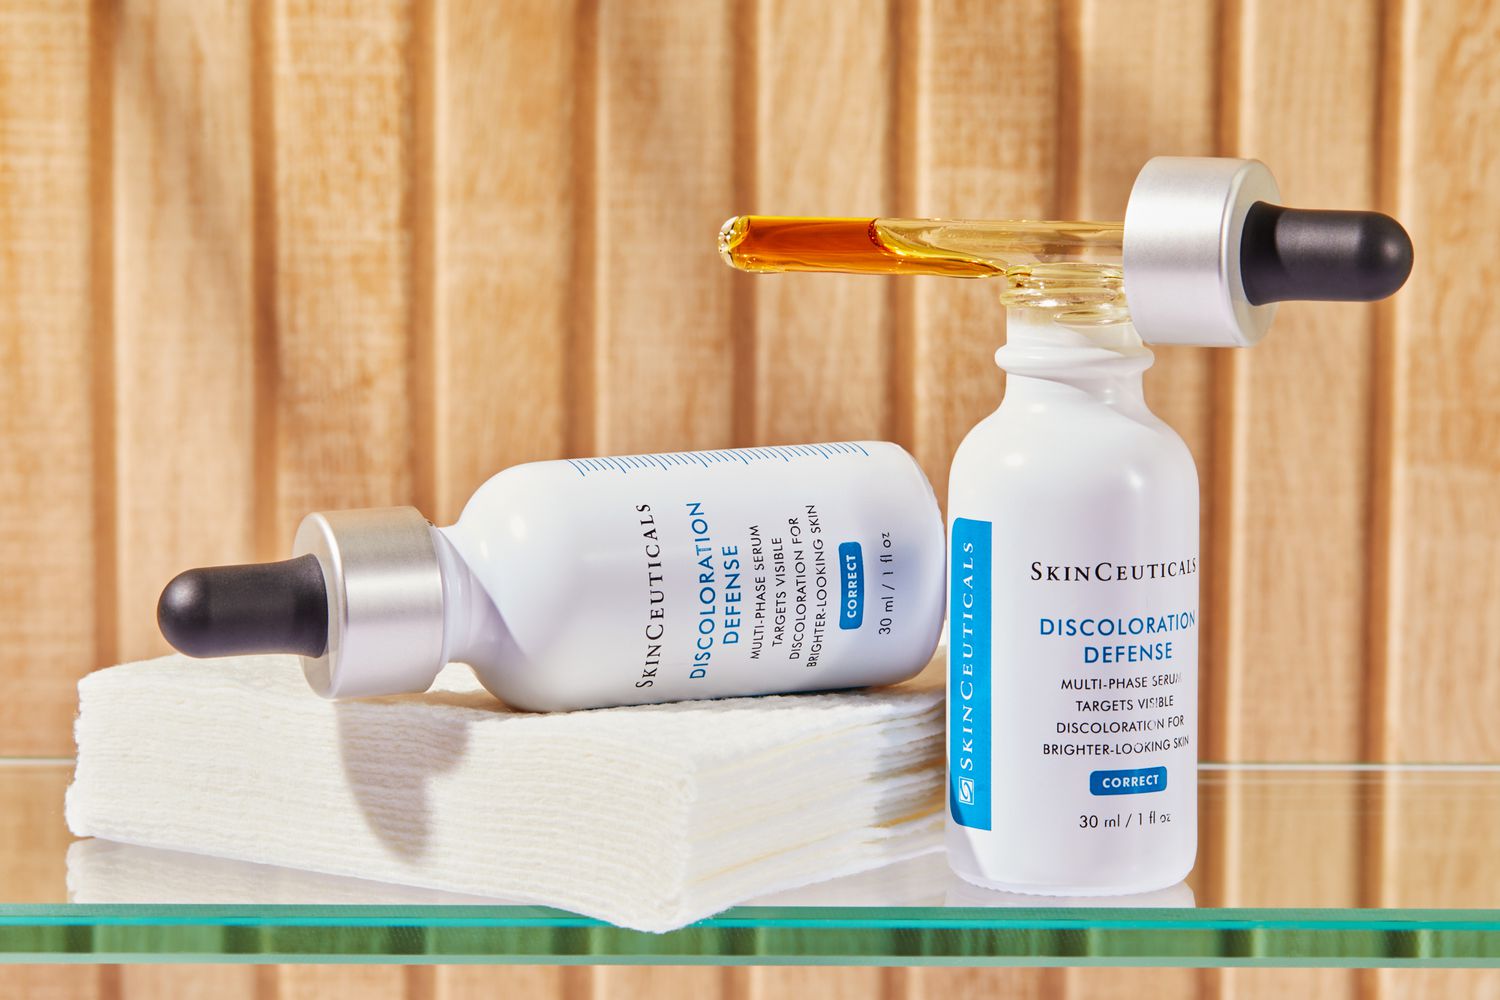 two bottles of Skinceuticals Discoloration Defense on glass shelf